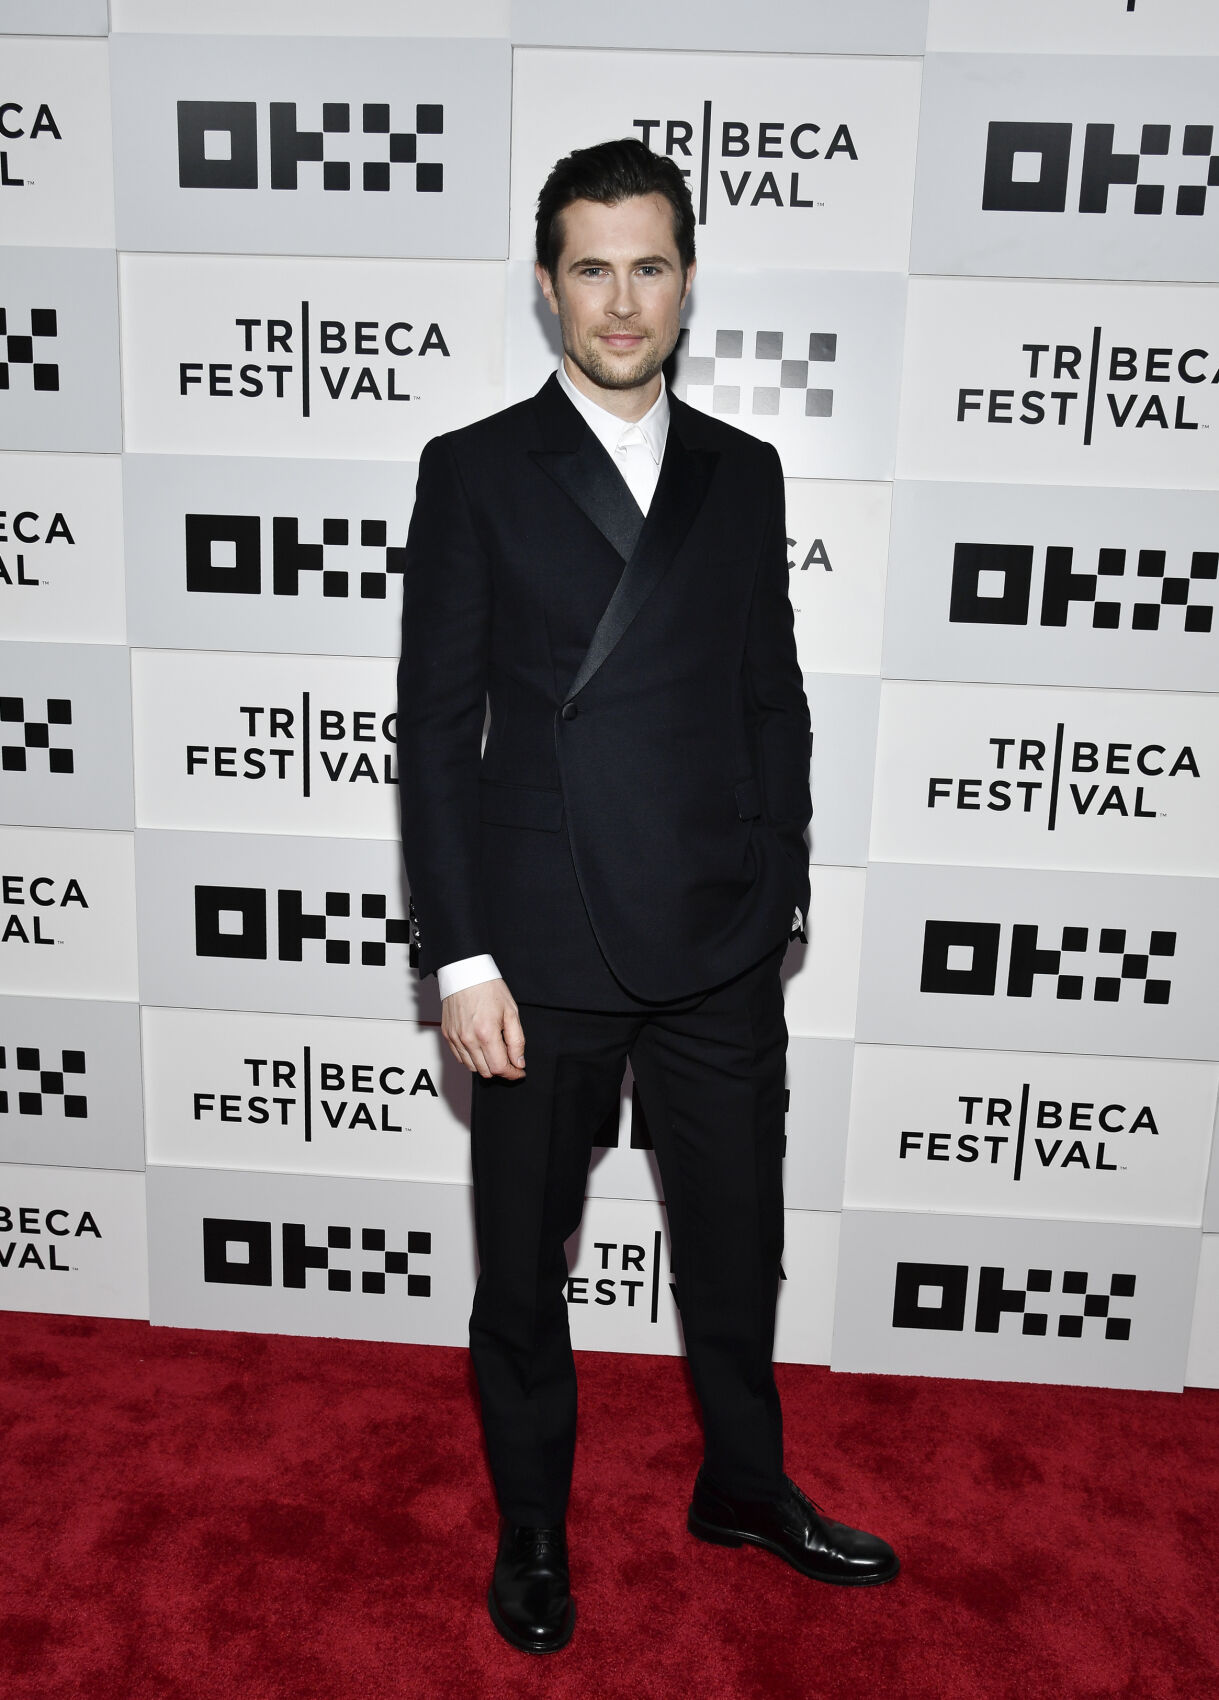 David Berry attends the "Outlander" premiere during the 2023 Tribeca Festival at BMCC Theater on June 09, 2023 in New York City.